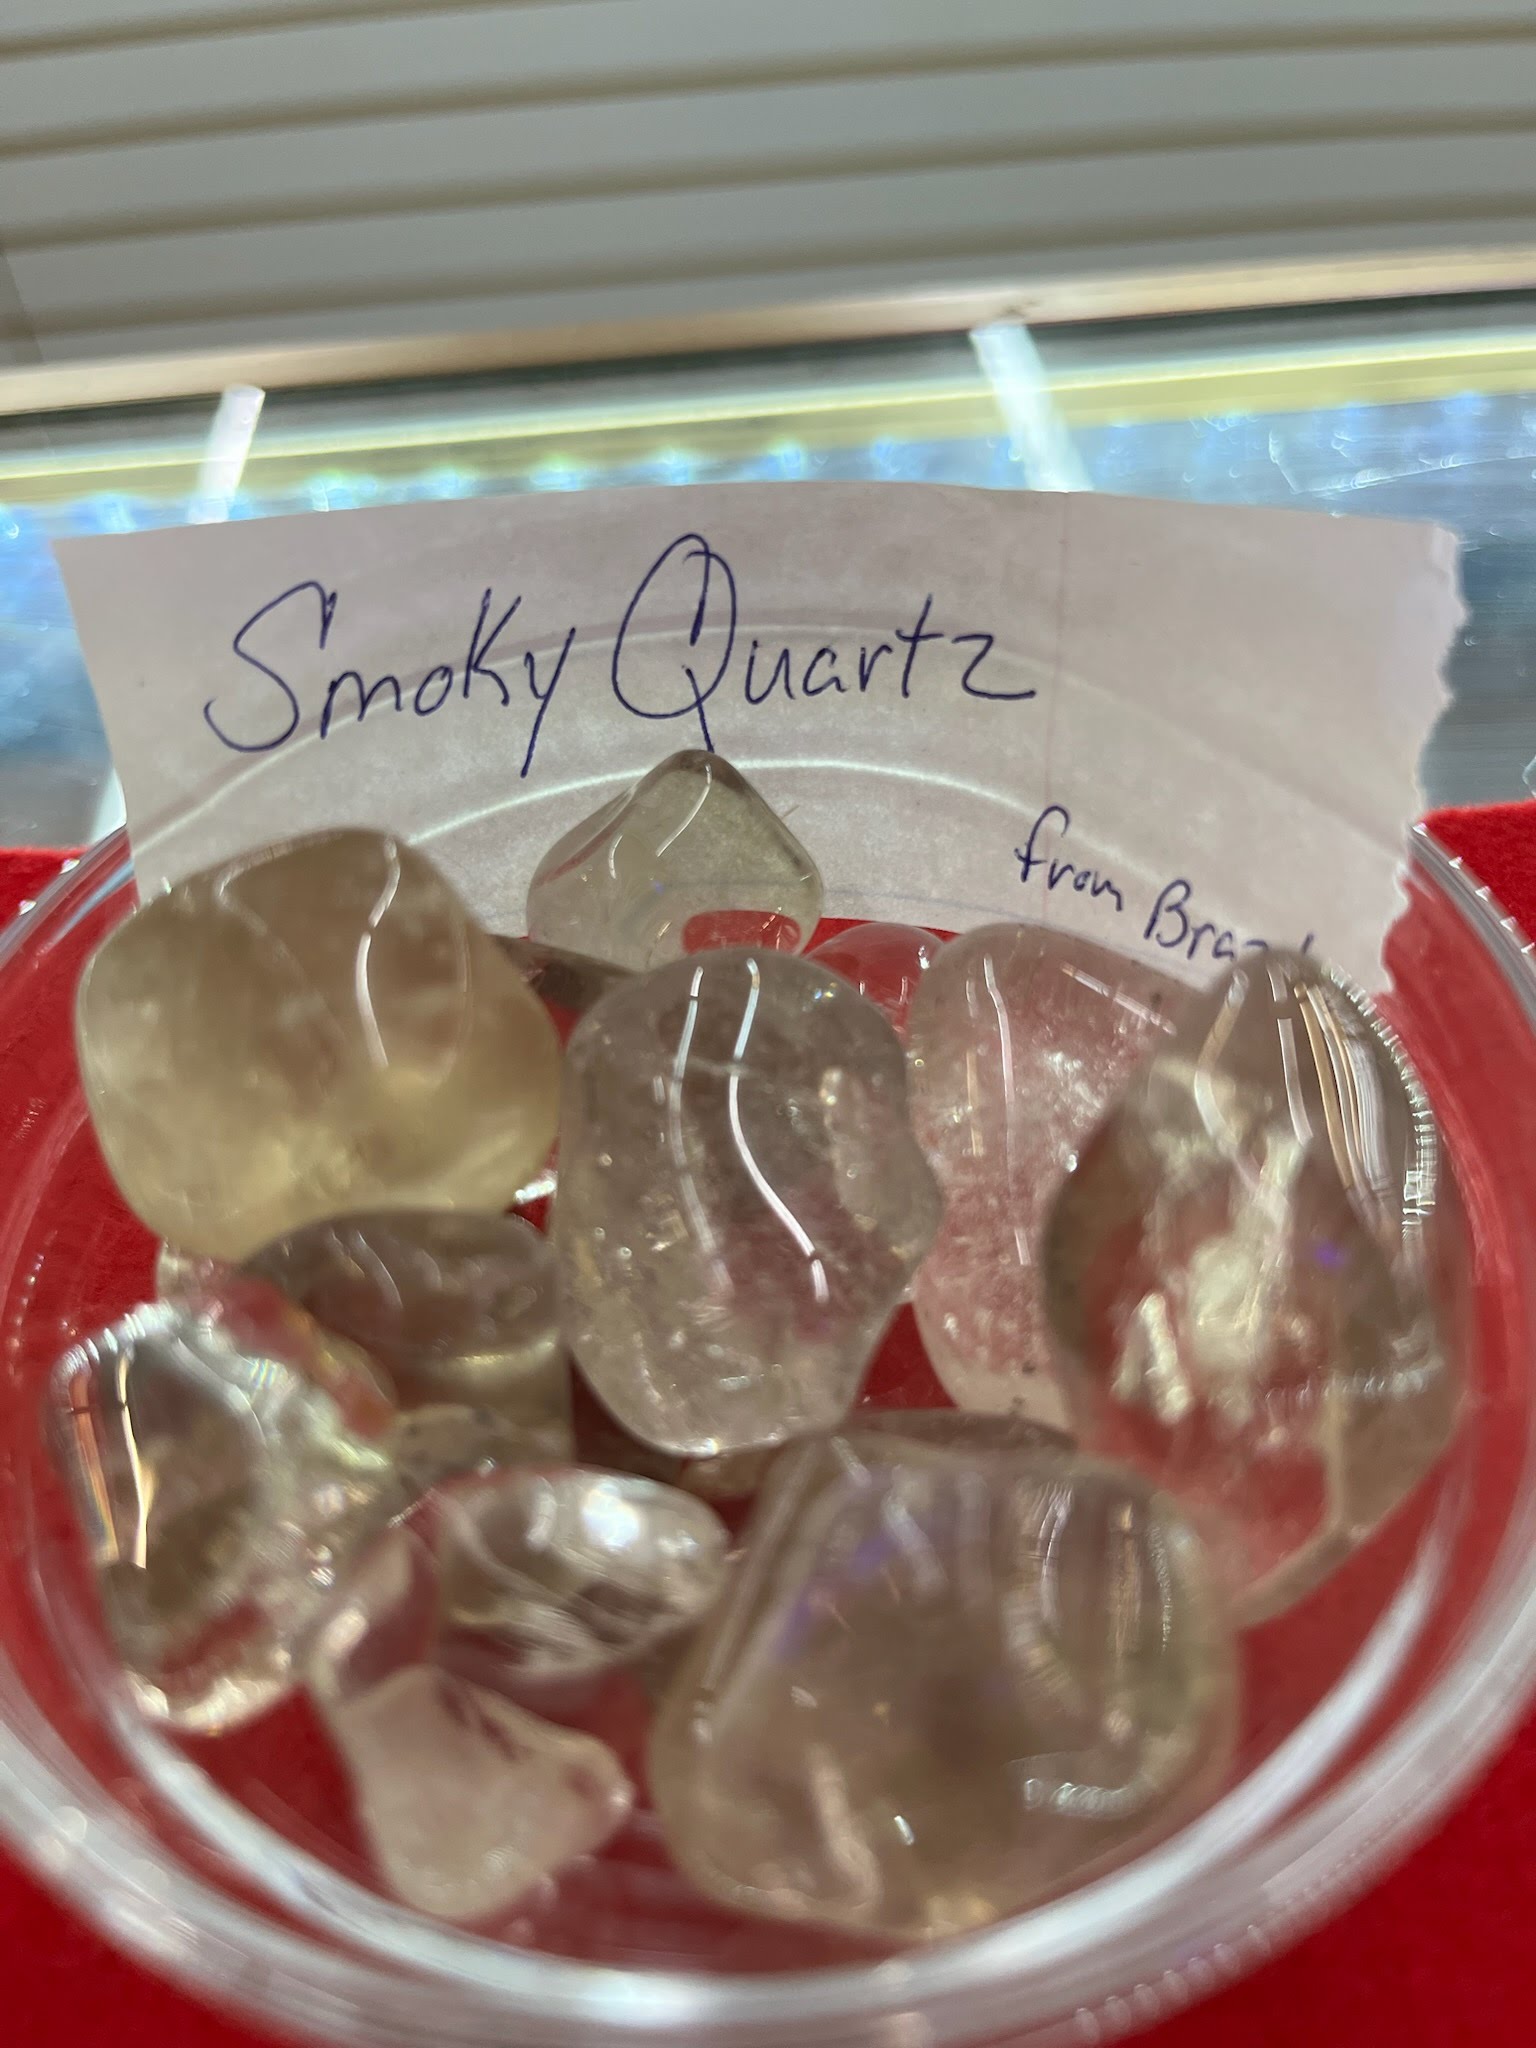 A bowl of smoky quartz is sitting on the table.